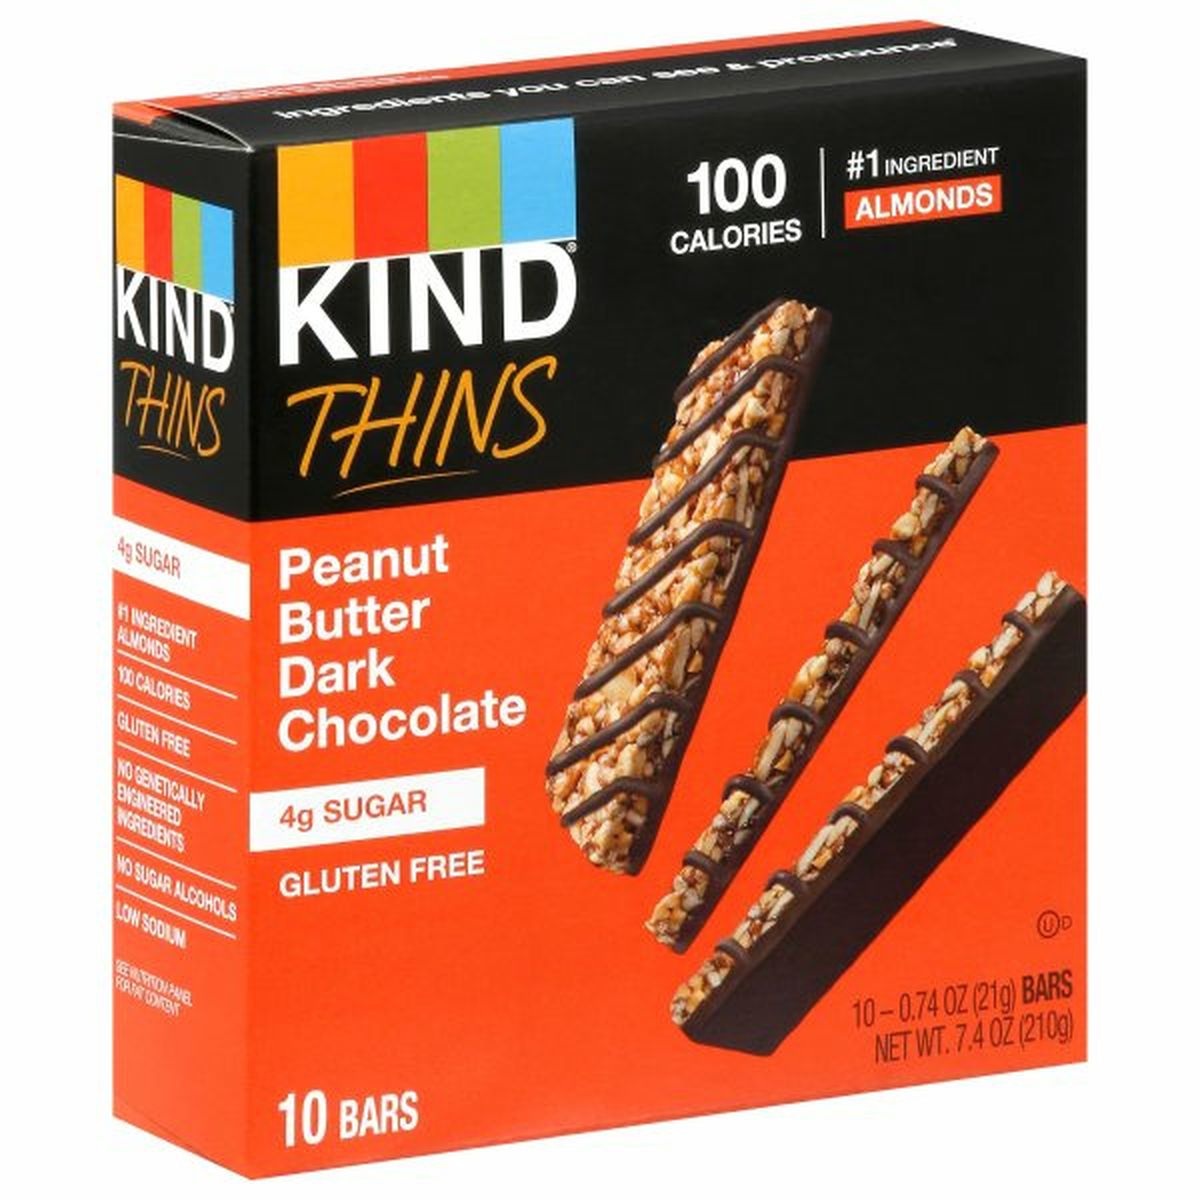 Calories in KIND Thins Bars, Peanut Butter Dark Chocolate